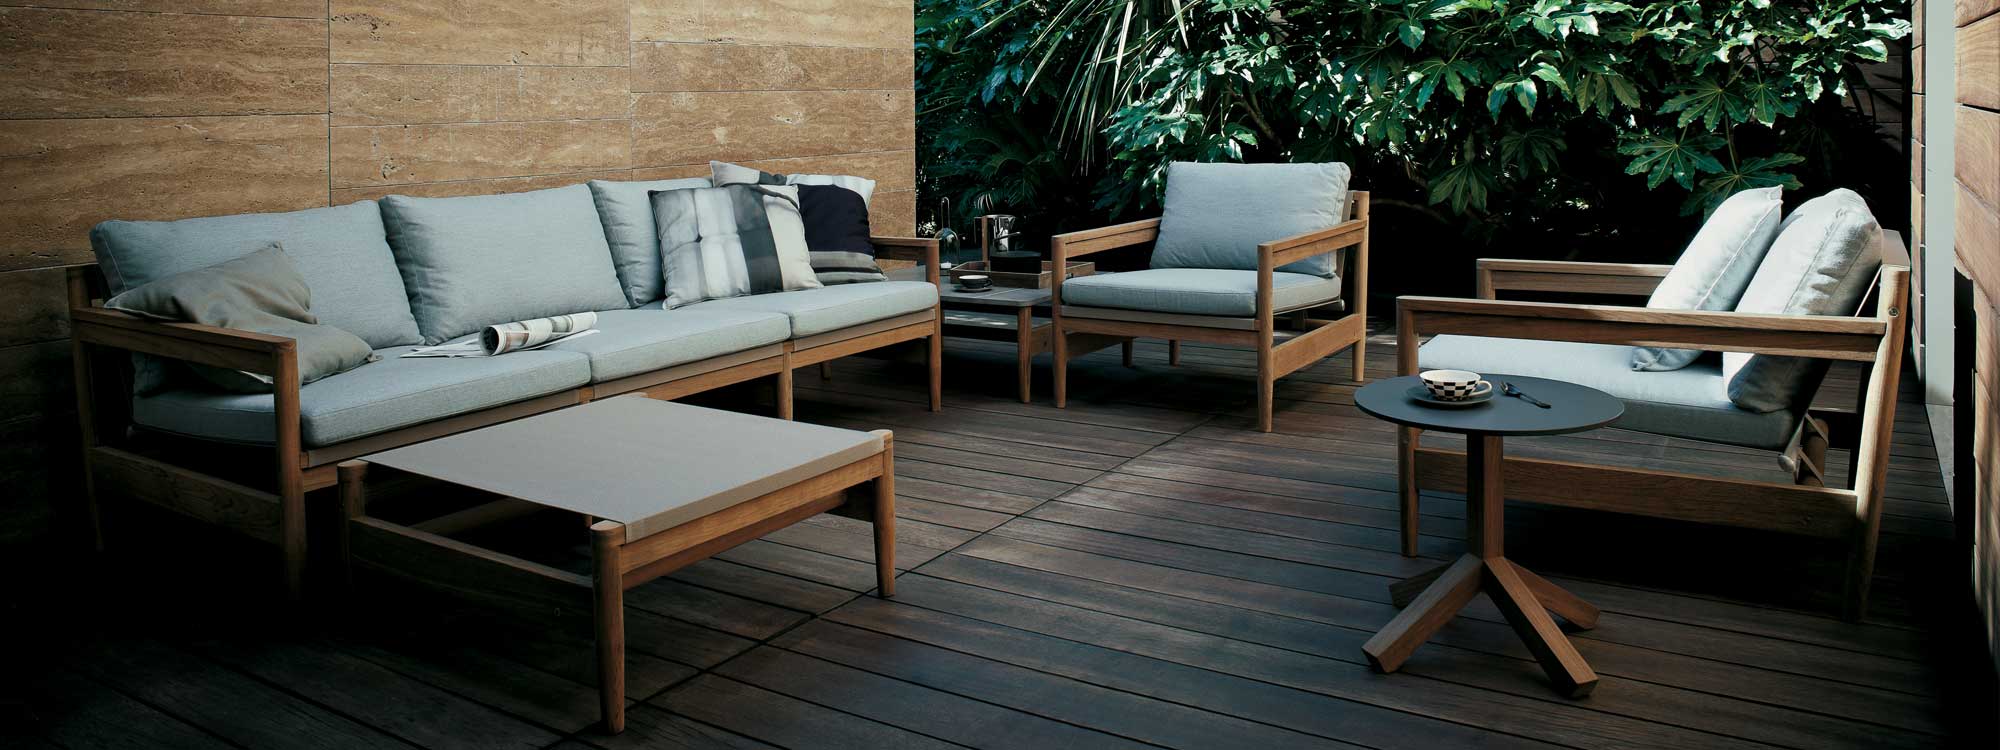 Road teak garden sofas on wooden decking with architectural planting in the background